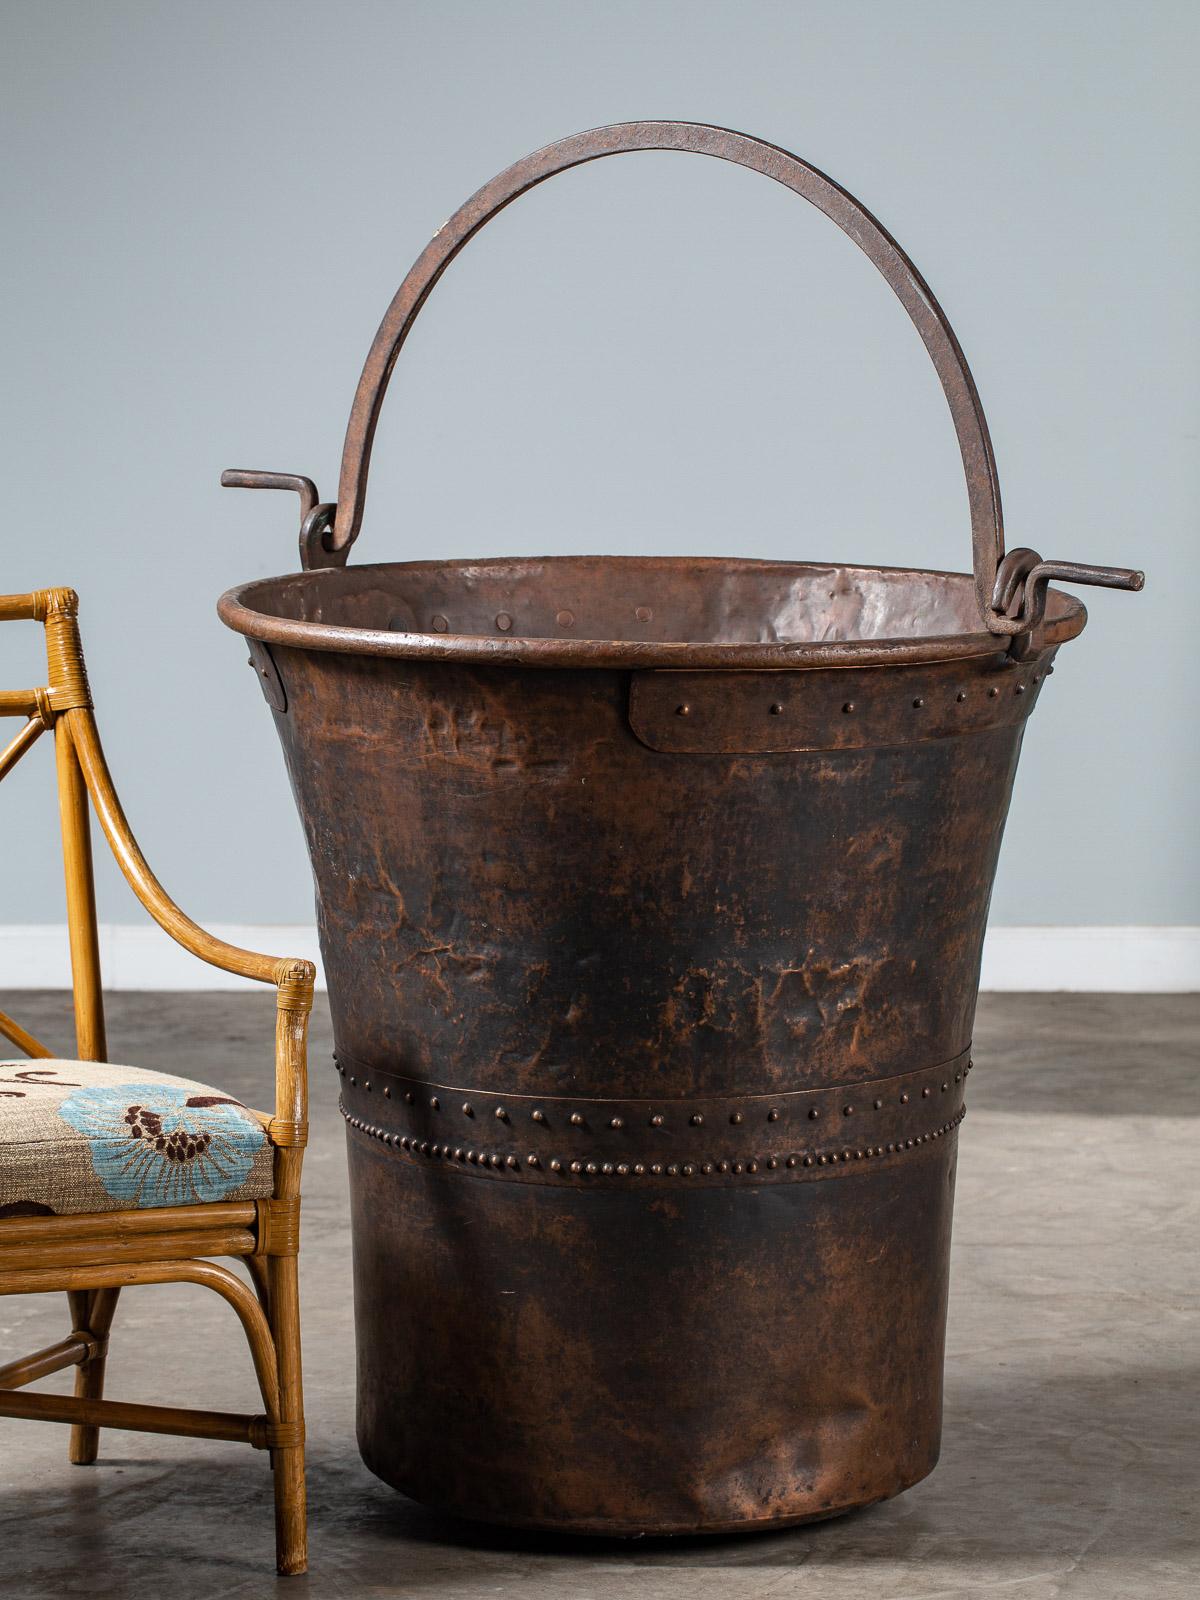 An enormous copper chocolate vat from Switzerland circa 1890 with the original iron handle. Made from sheets of copper riveted together this huge vat was used in the large scale production of chocolate. Entirely circular with a rounded base the